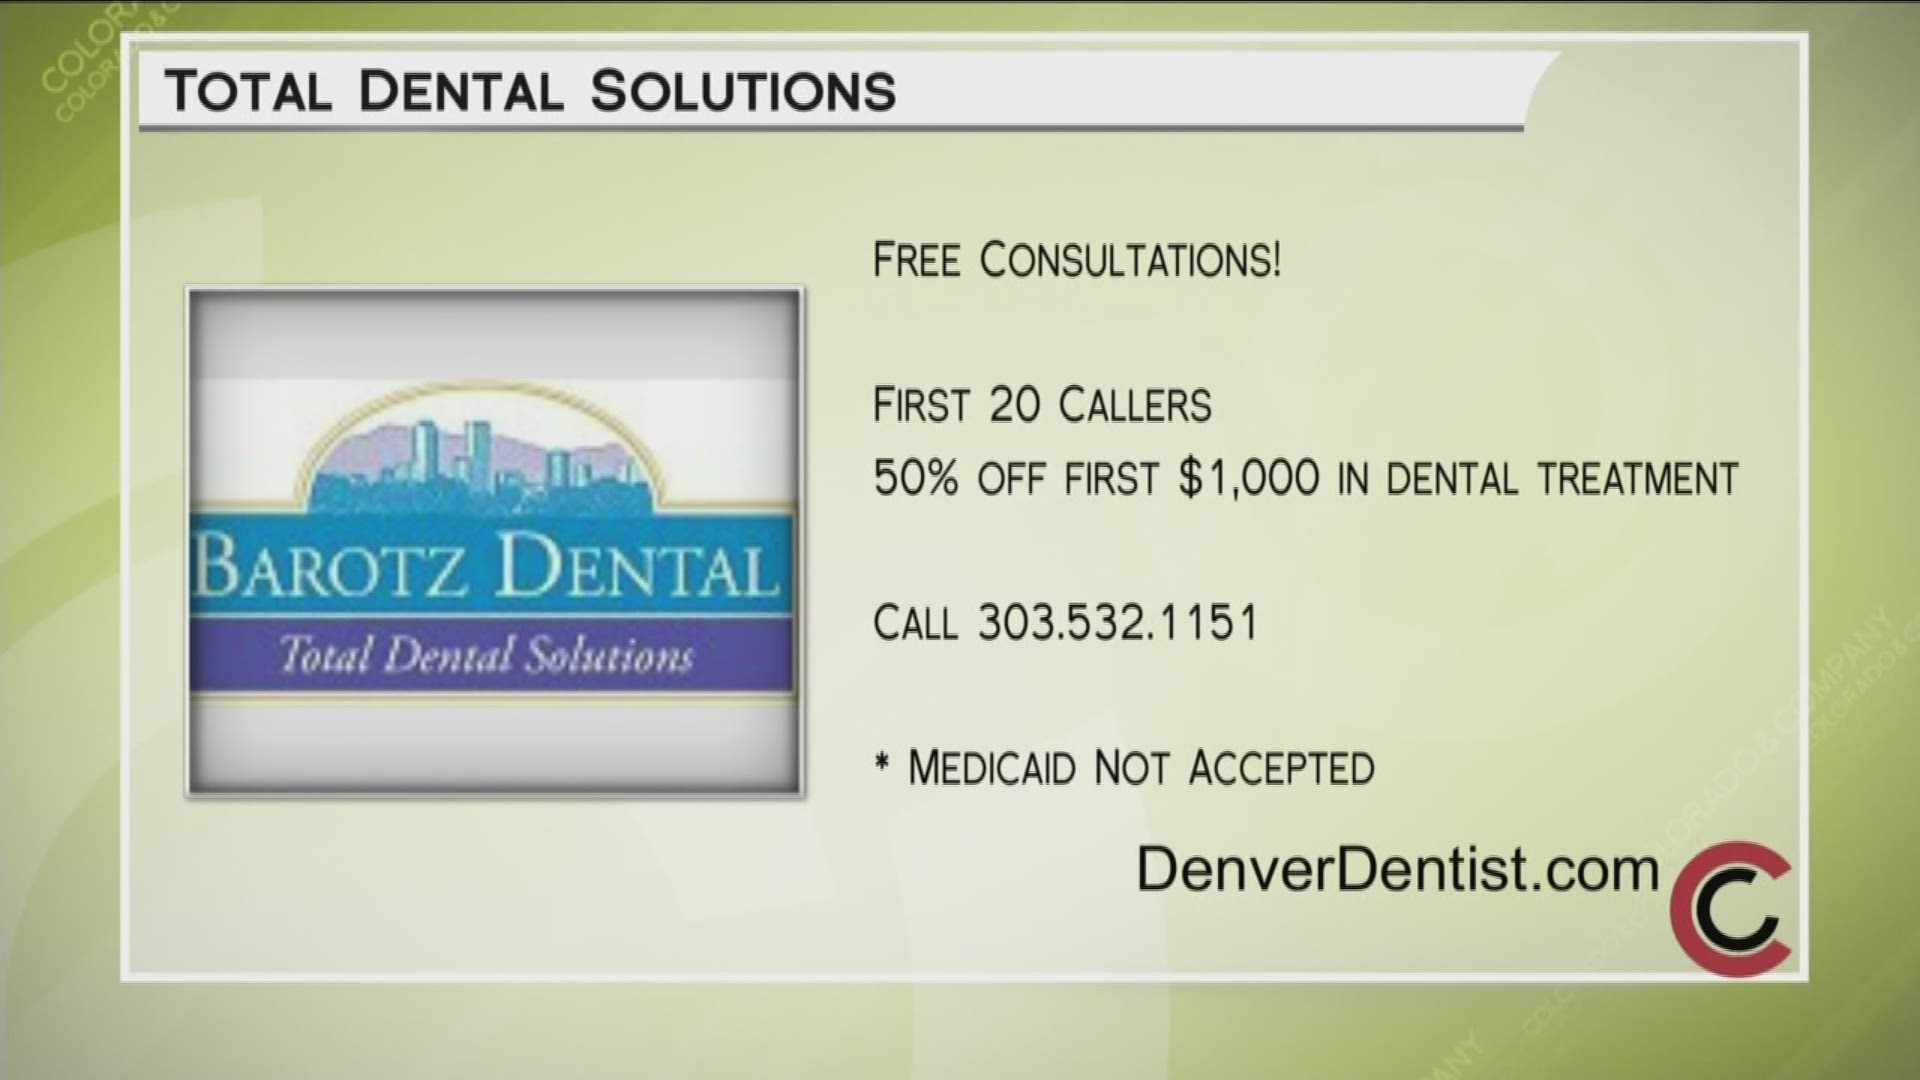 Find out what Dr. Barotz can do for you by calling 303.532.1151, or online at www.DenverDentist.com.